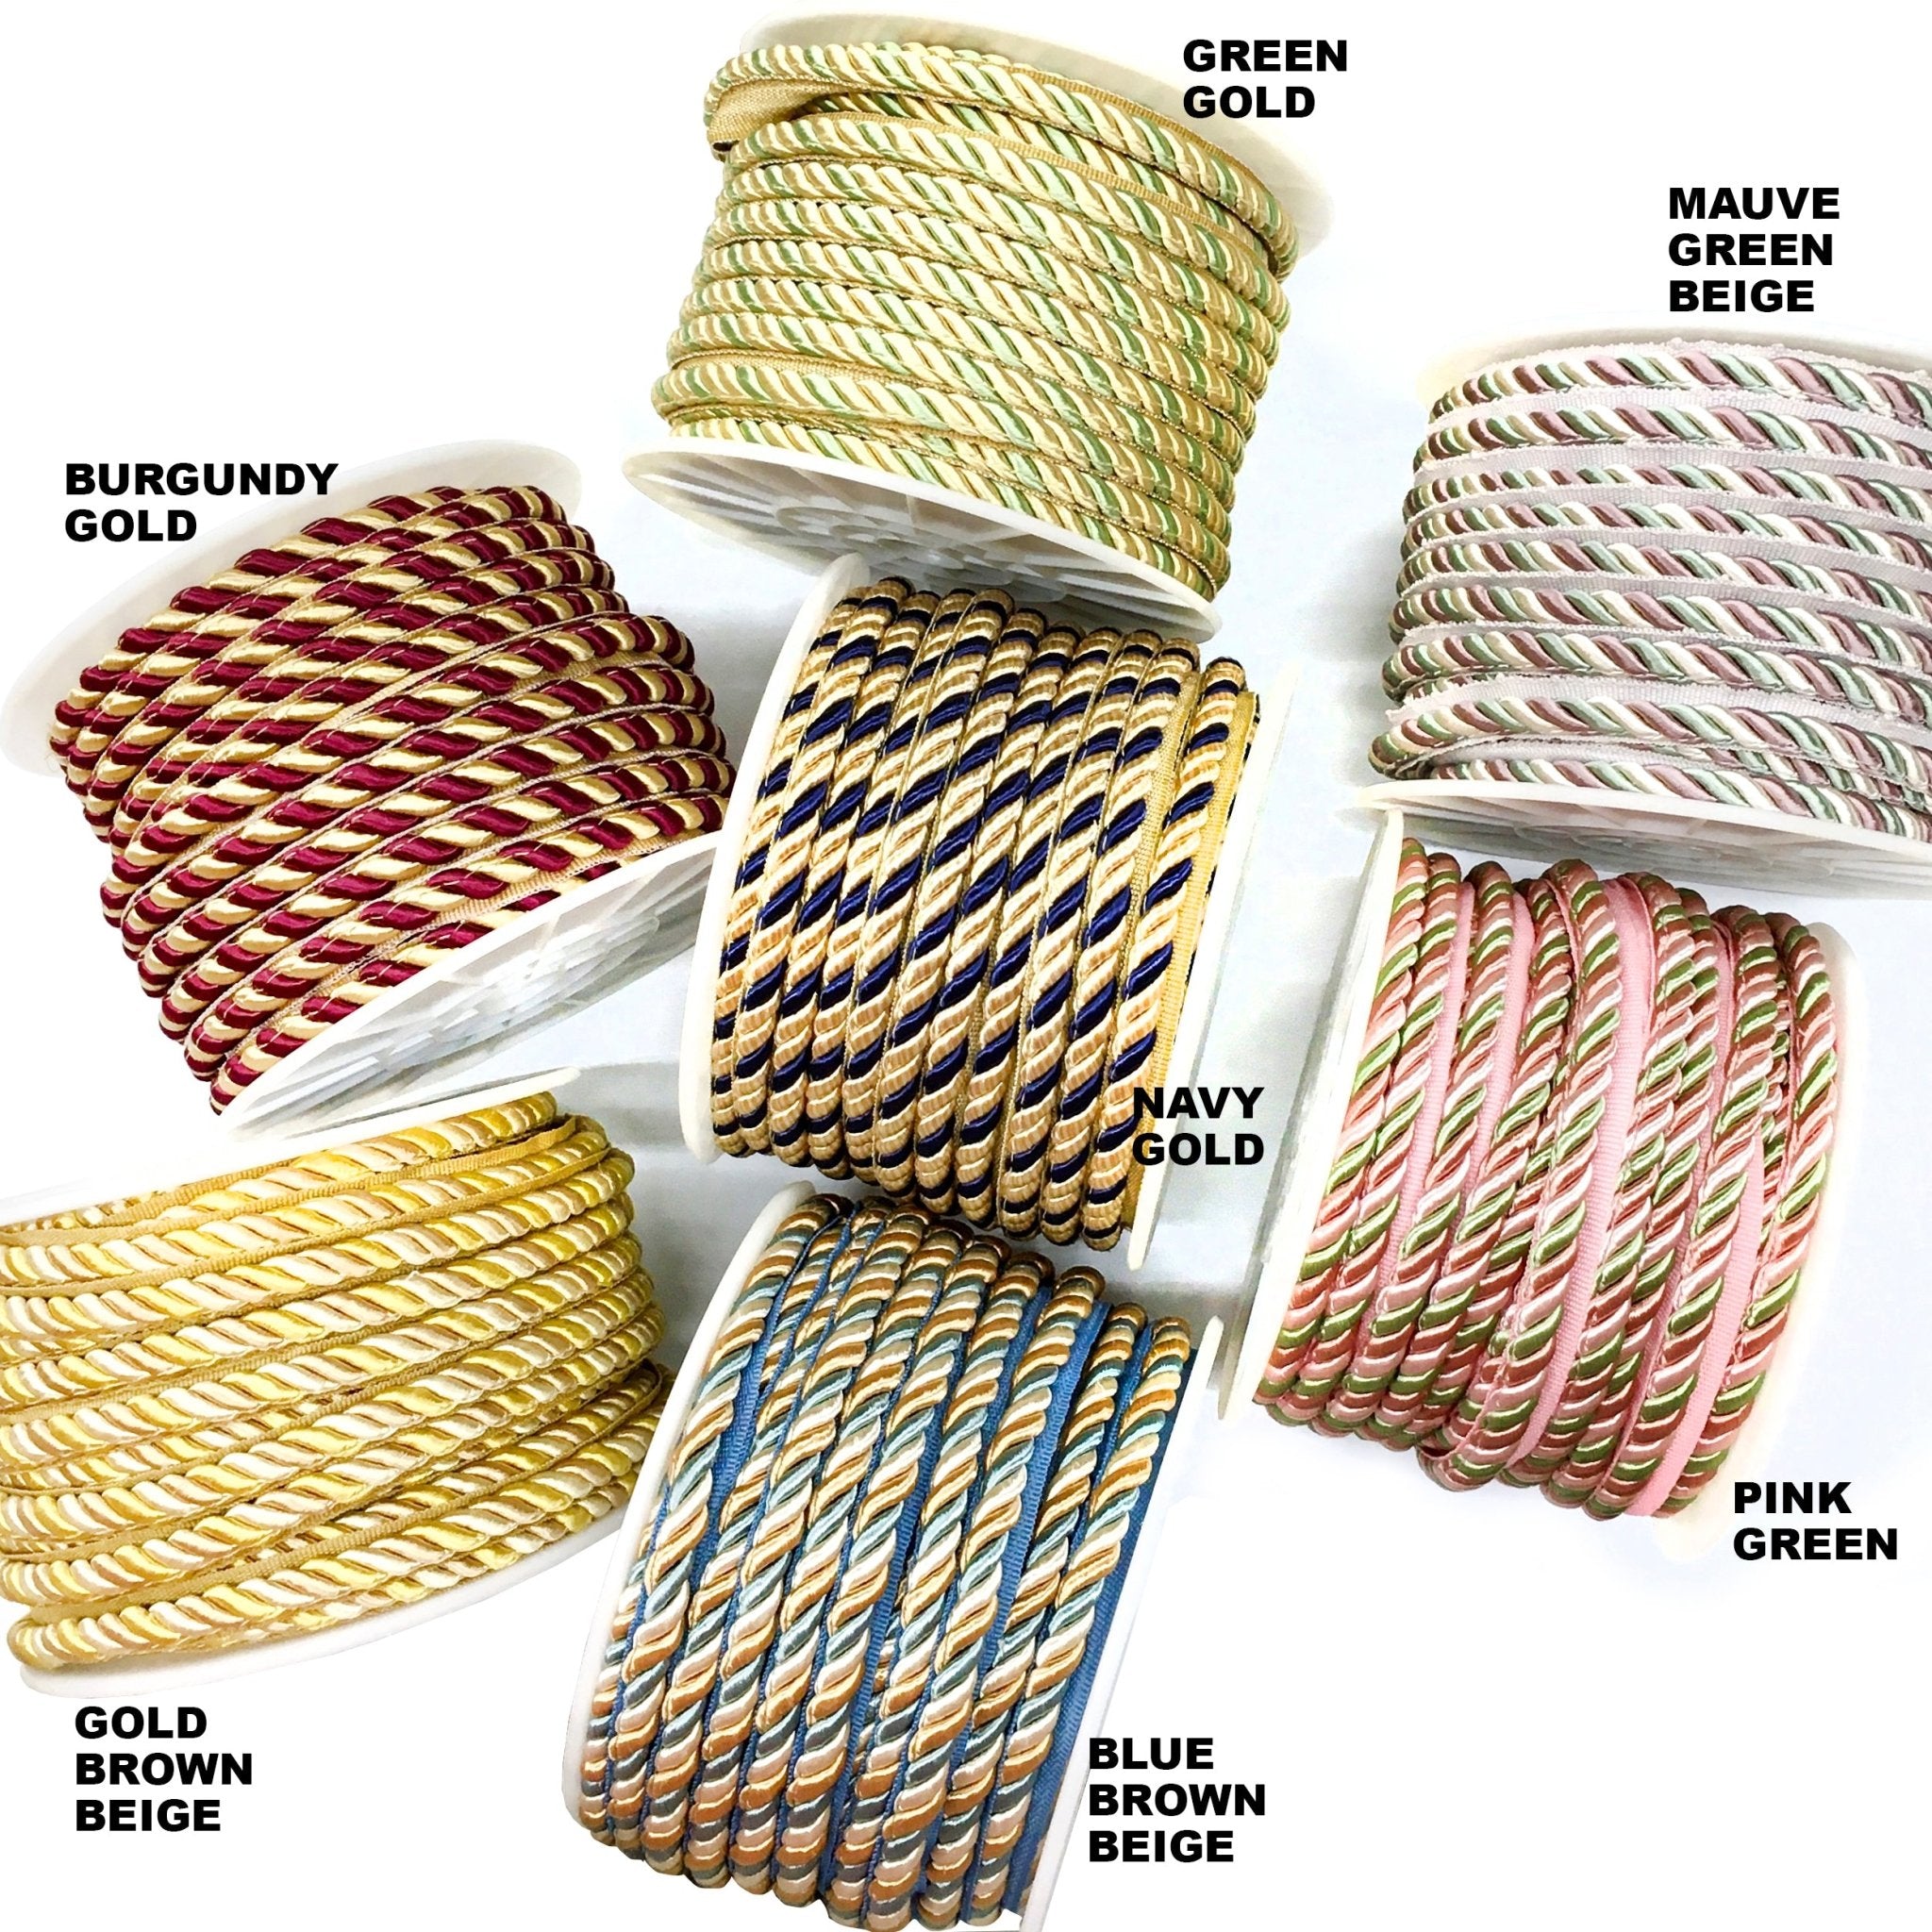 25 YARDS / 9 COLORS / 3/8 Twisted Cord Rope, 9mm 3 ply Cord, Trim, Piping,  Cording with Lip